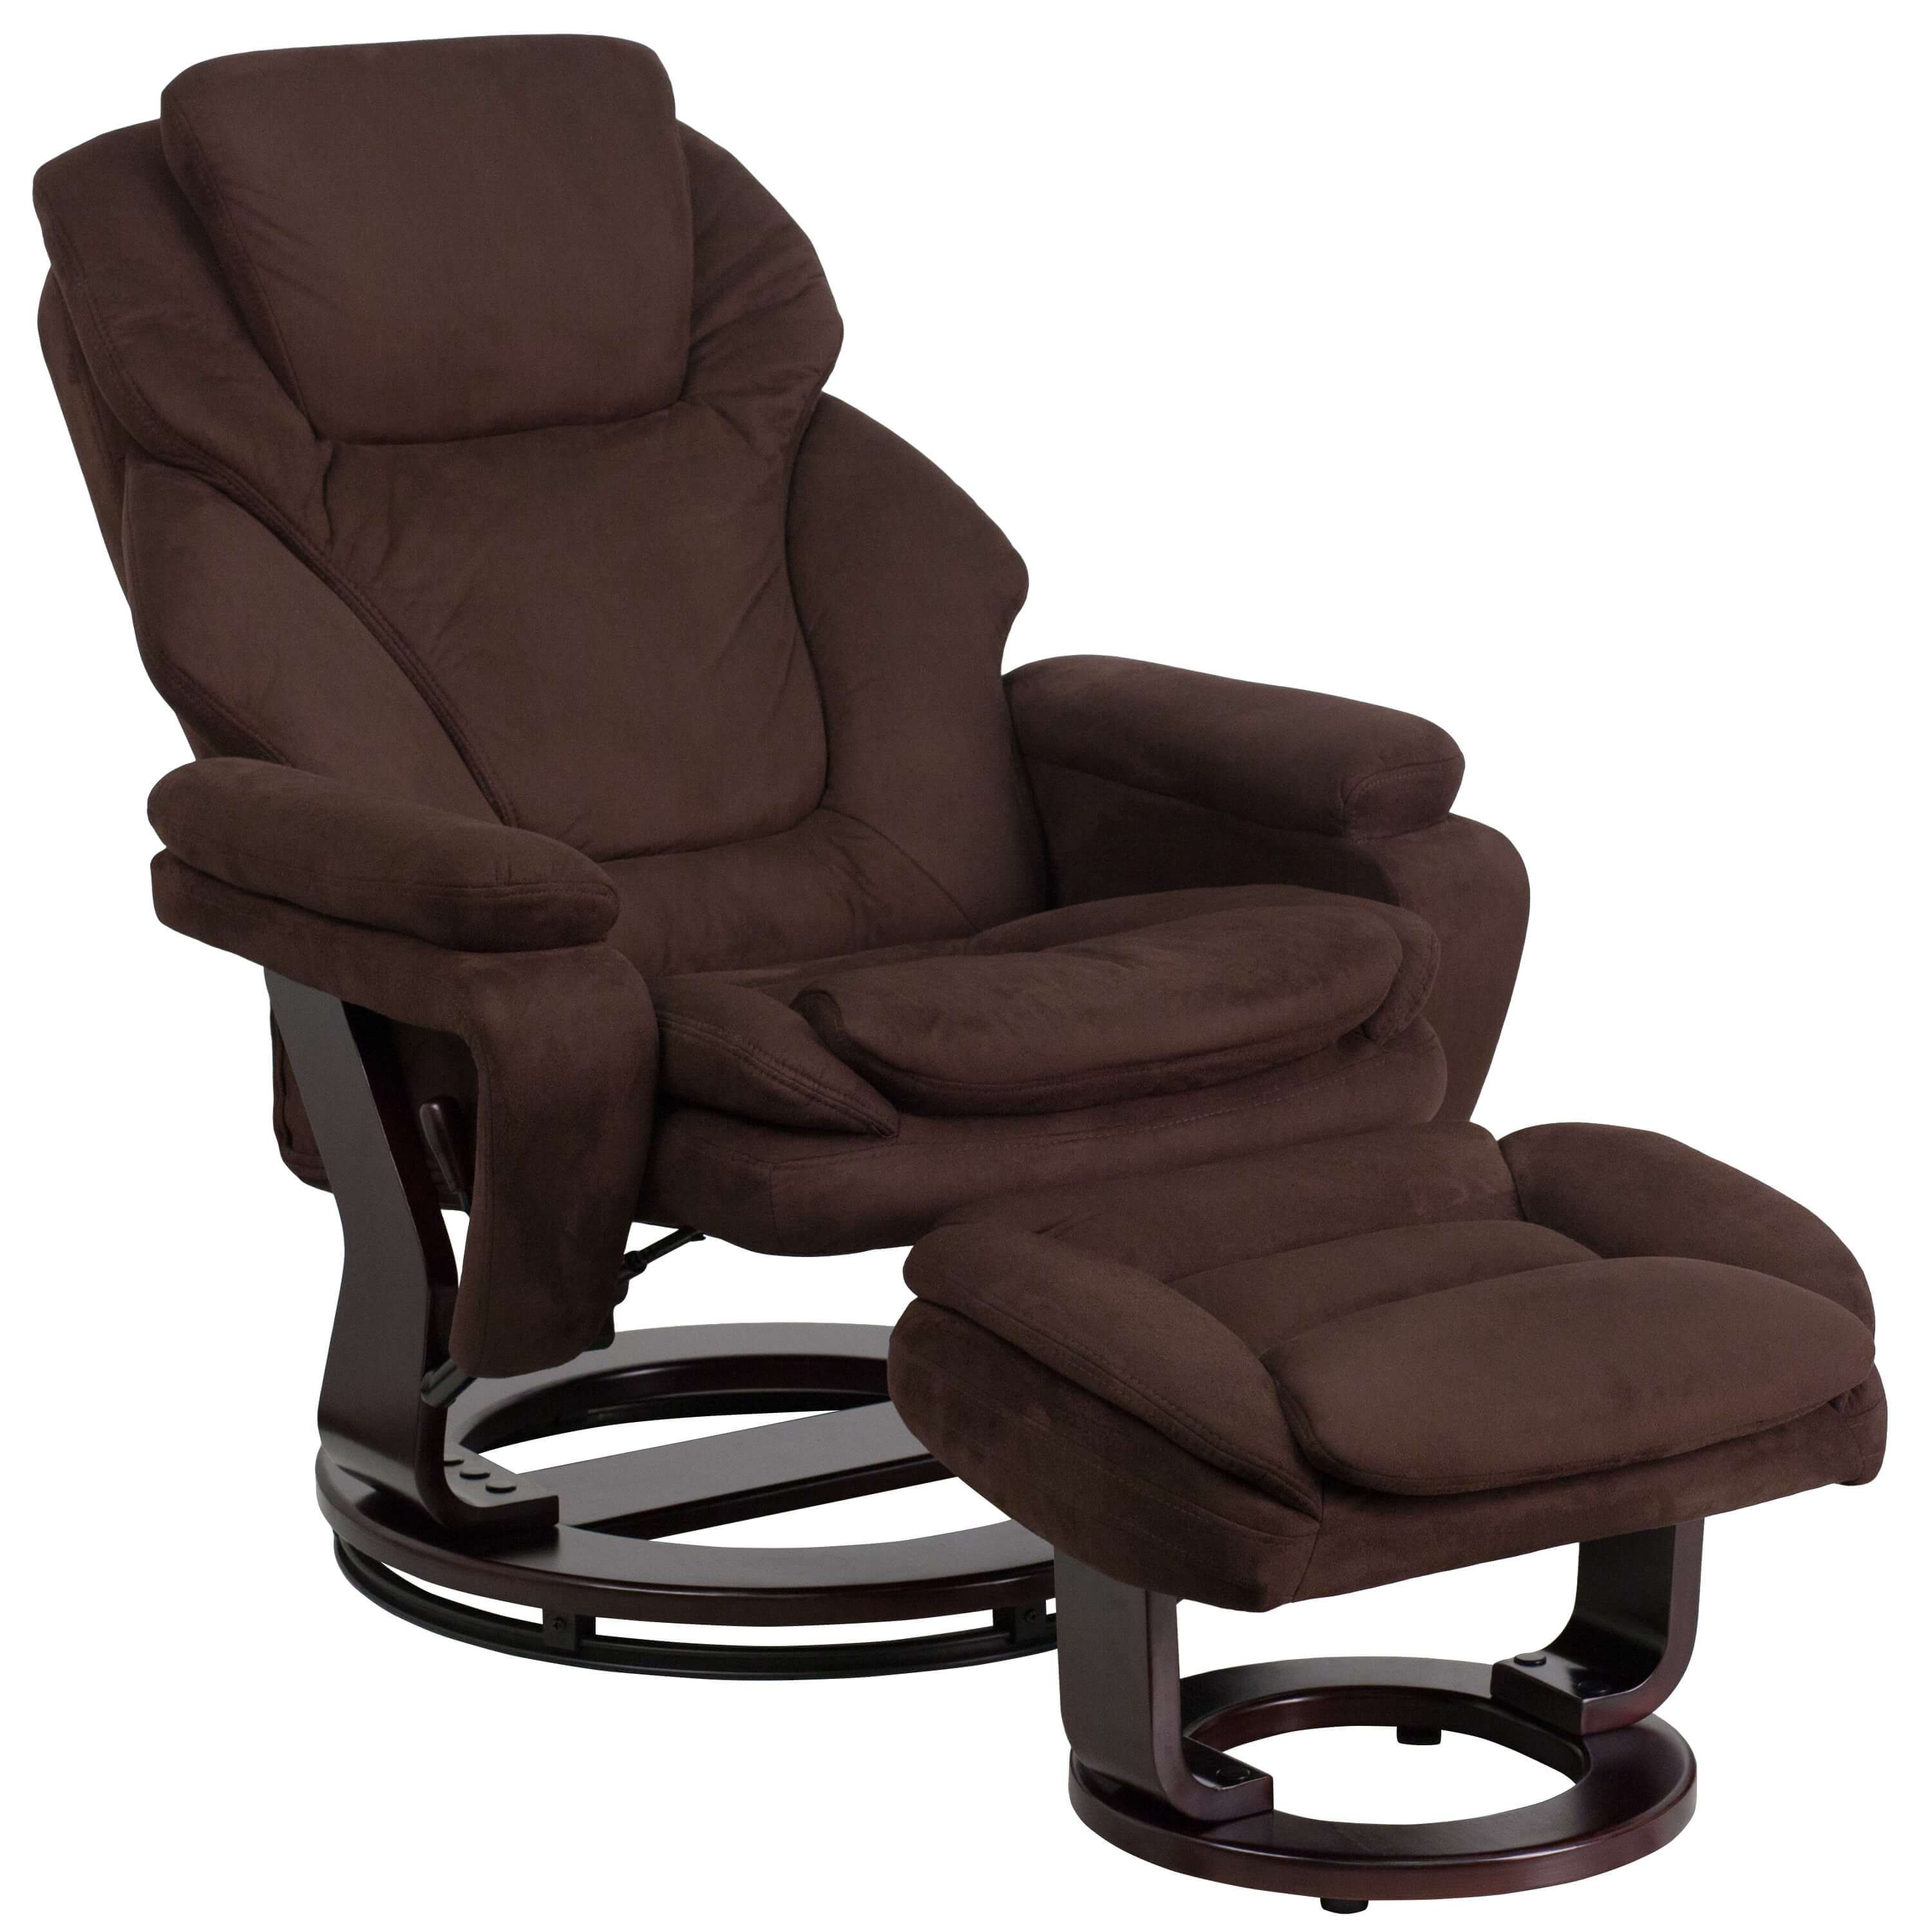 Brown recliner reclined view